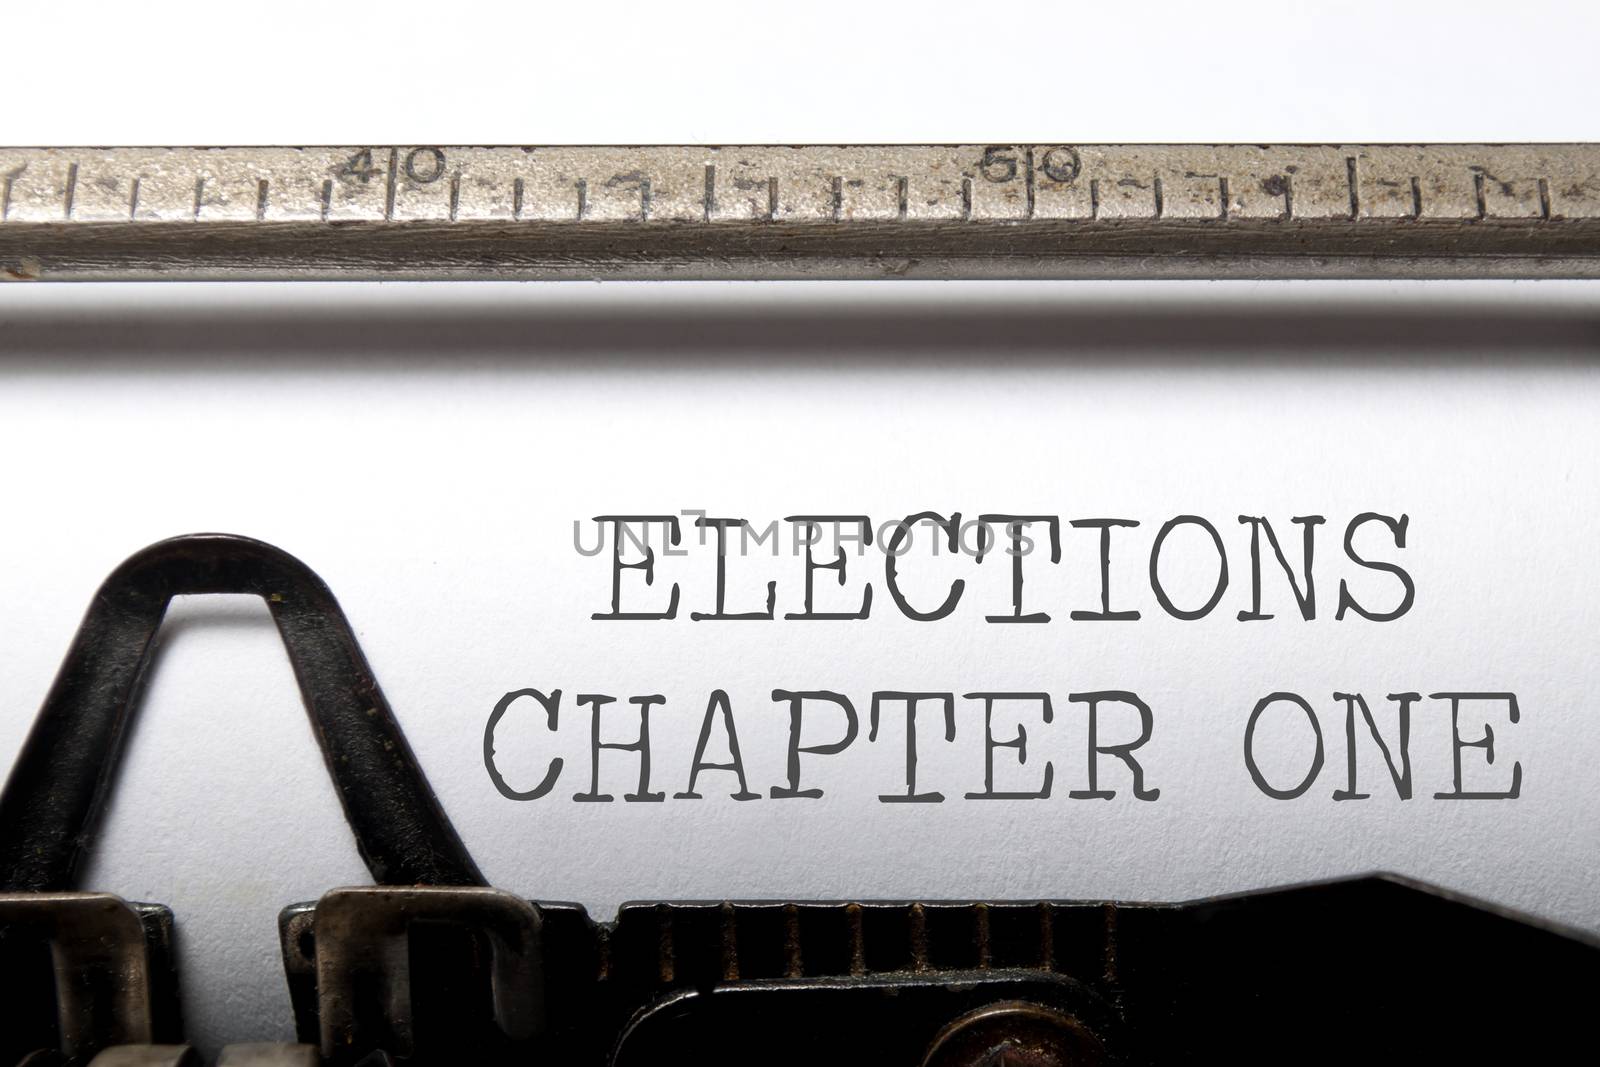 Elections chapter one by unikpix